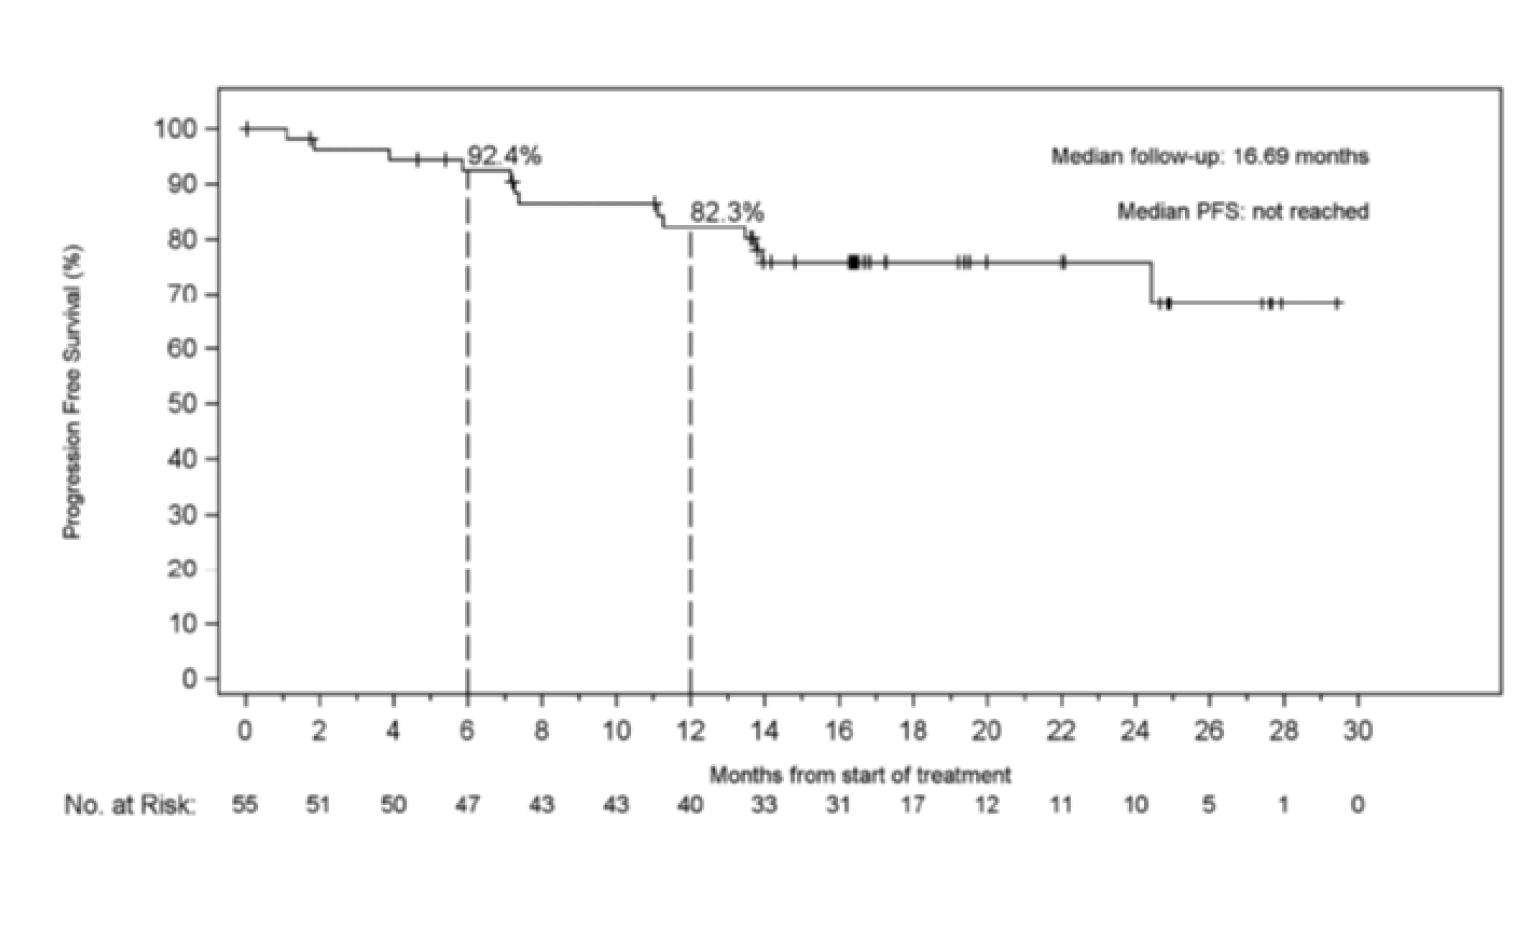 The figure depicts a Kaplan-Meier plot for PFS. Starting at 100% of patients, the progression-free survival rate goes downward to 92.4% at 6 months and 82.3% at 12 months. The 50% mark is not reached at 30 months of follow-up.